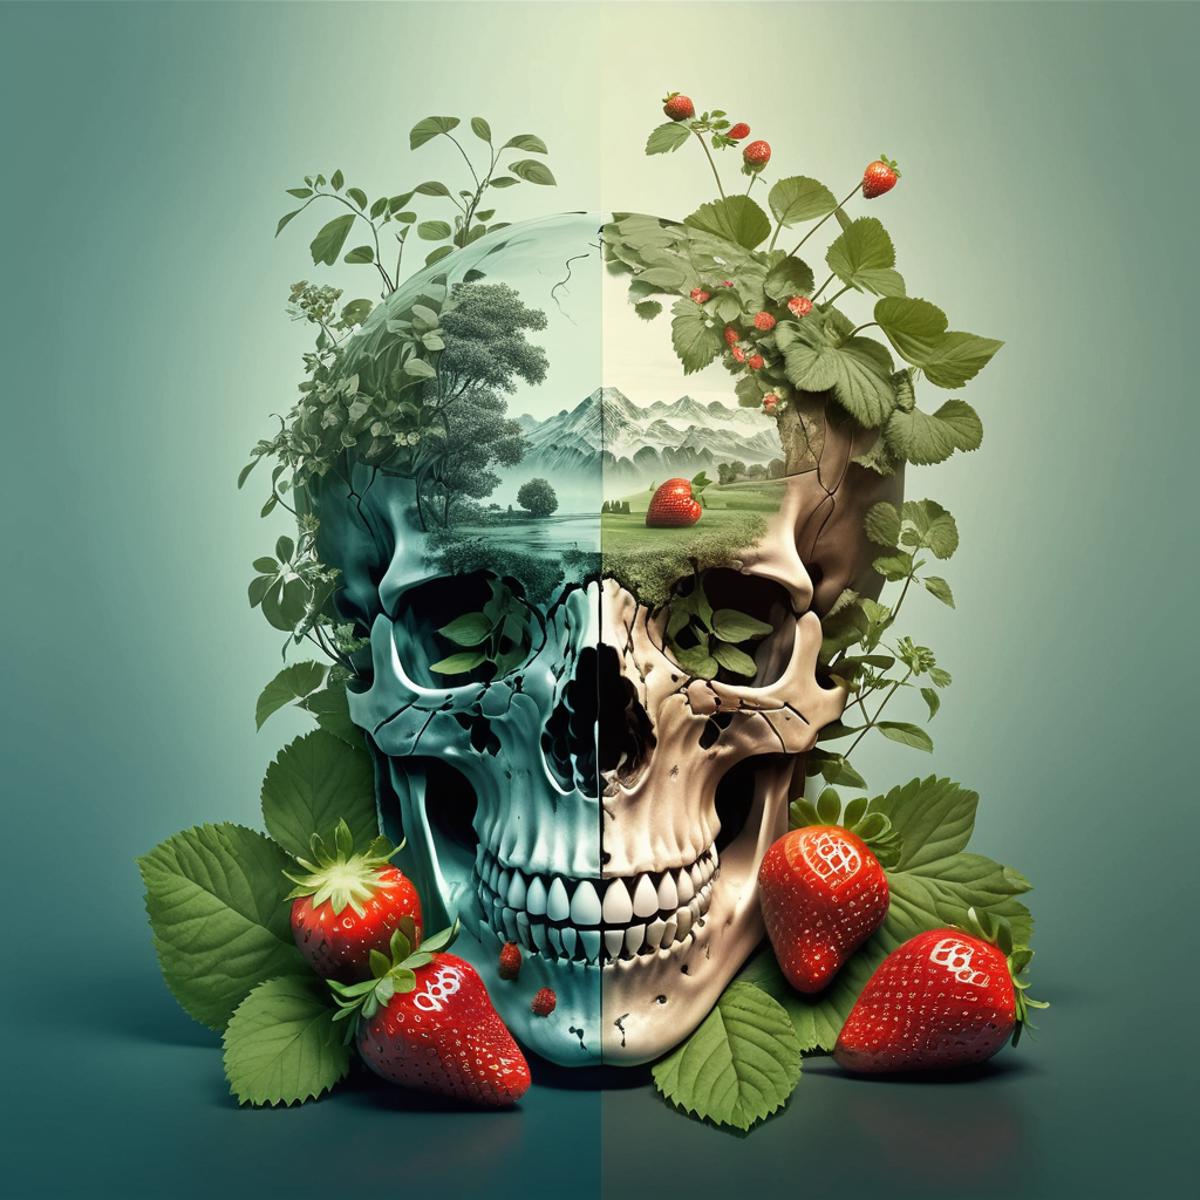 A skull with strawberries and leaves on top of it, and a green tree in the background.